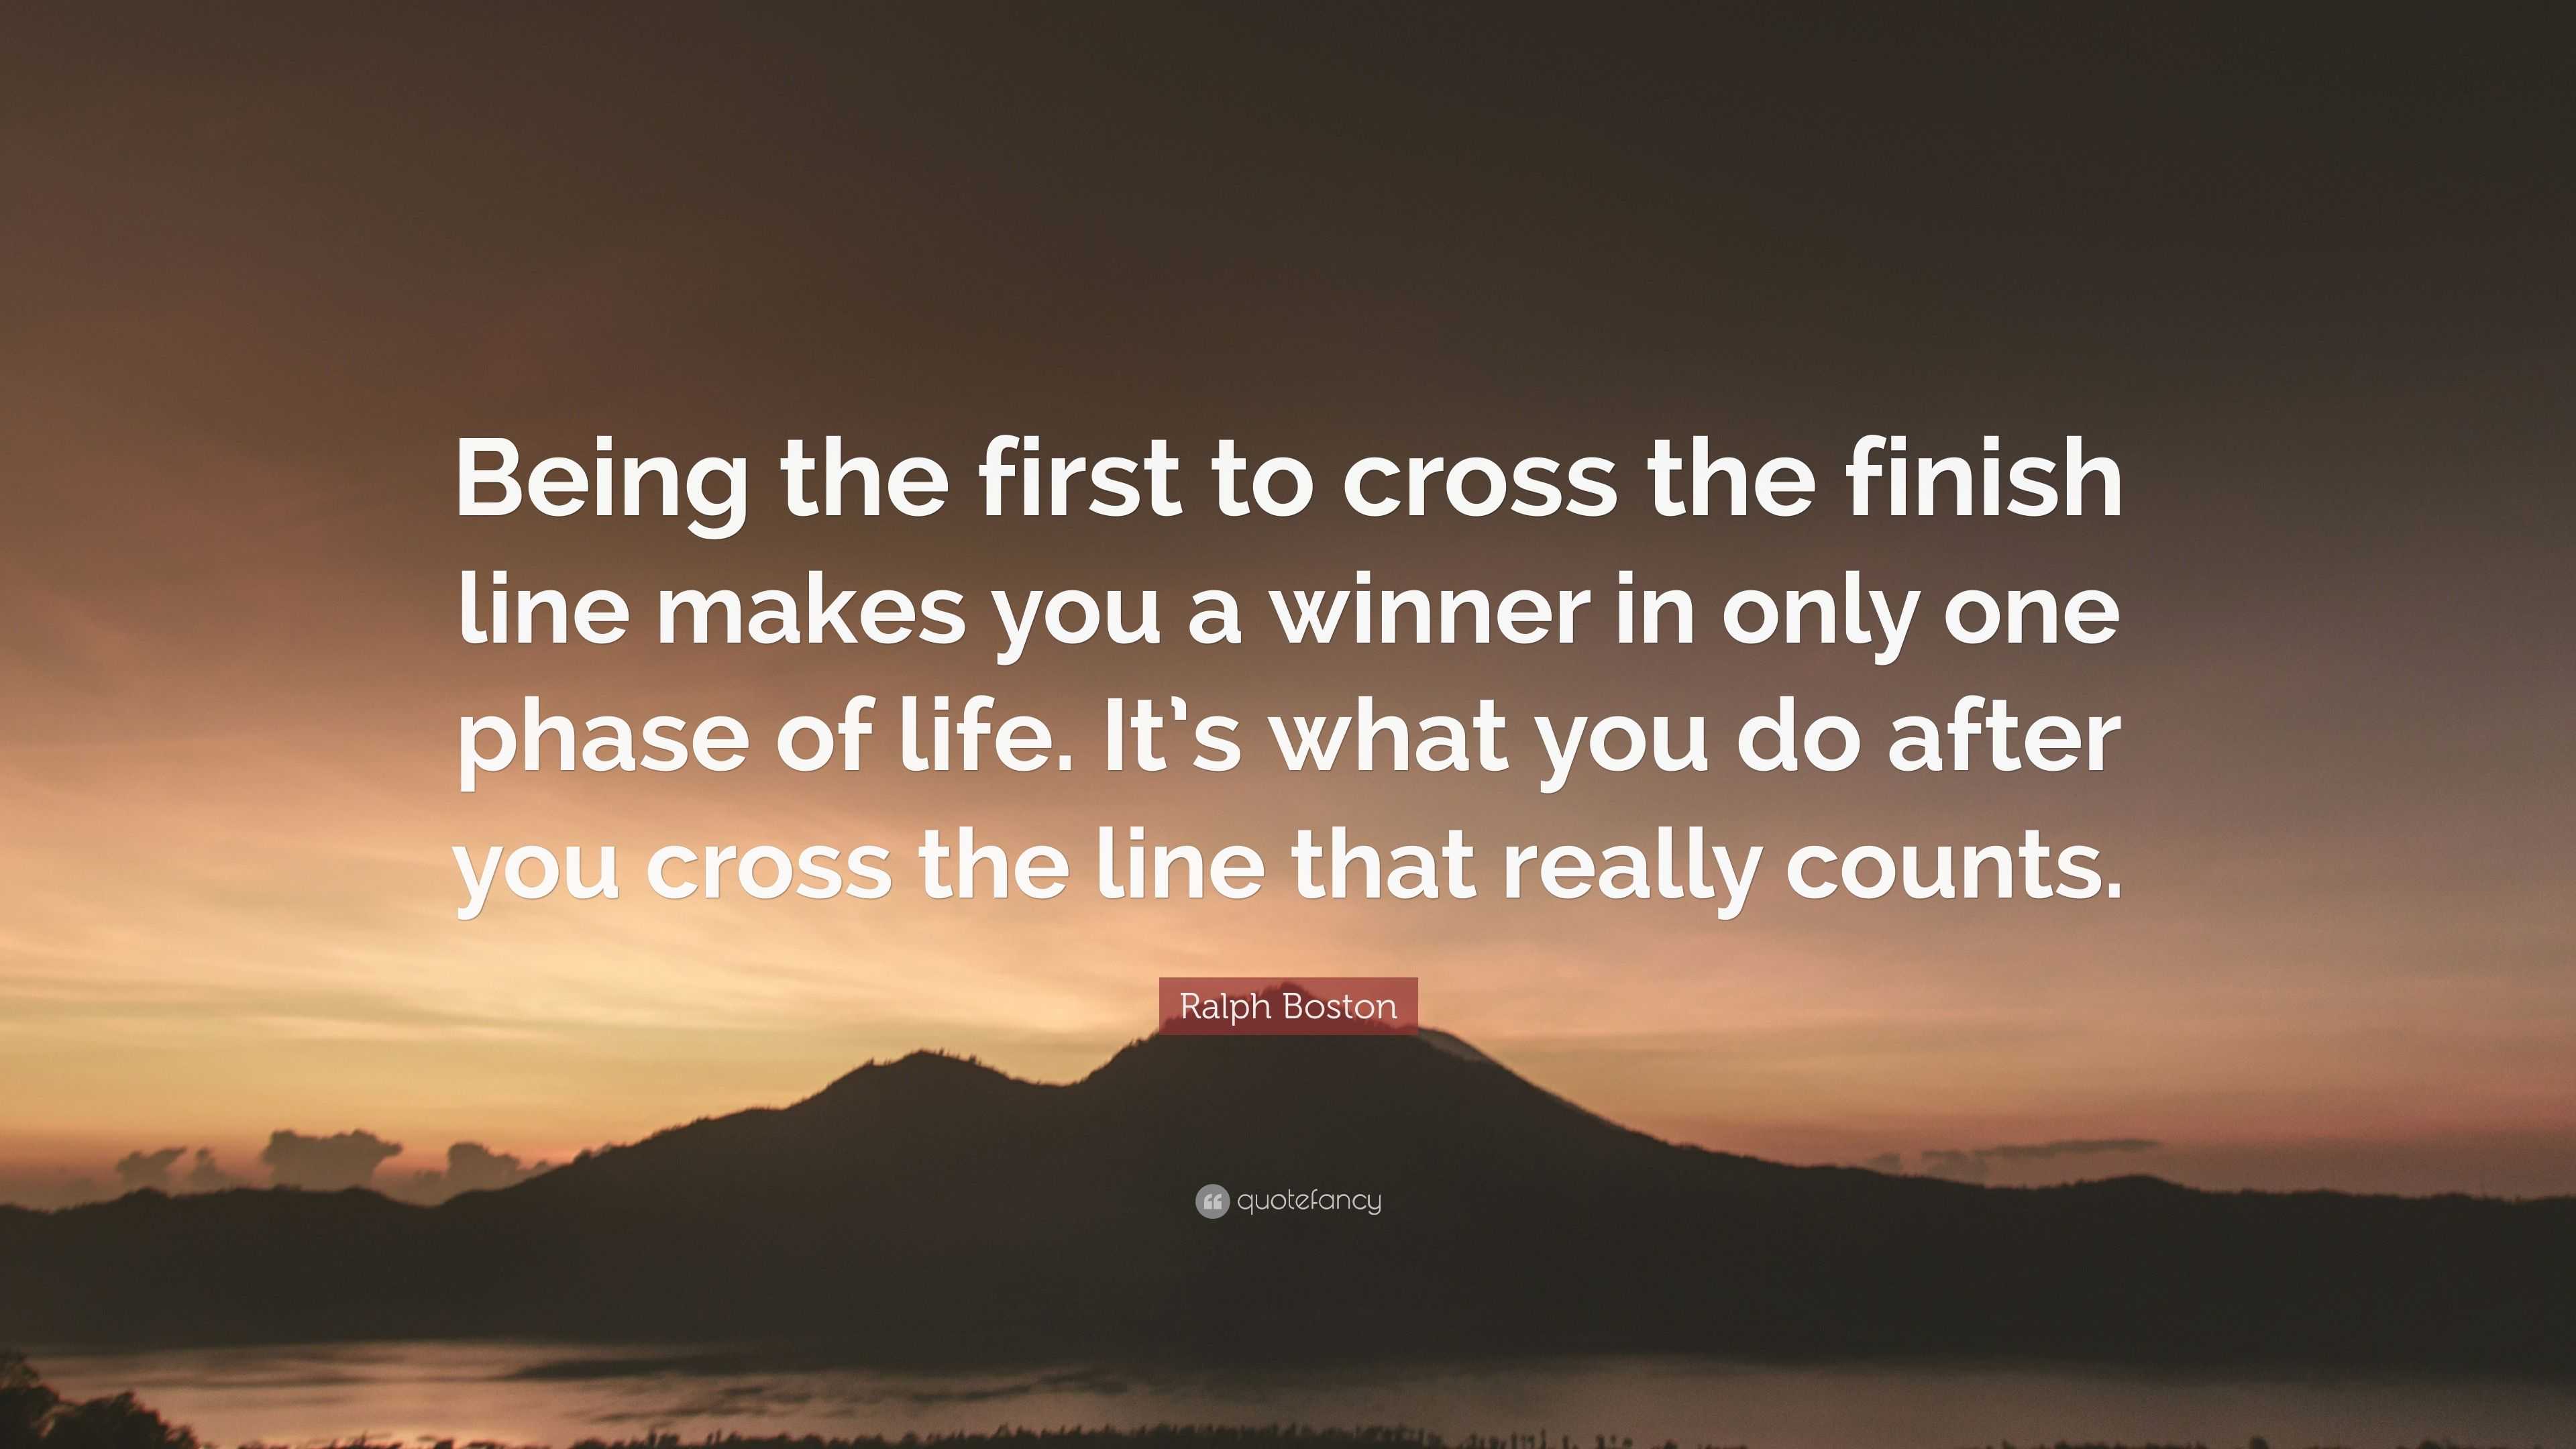 Ralph Boston Quote “Being the first to cross the finish line makes you